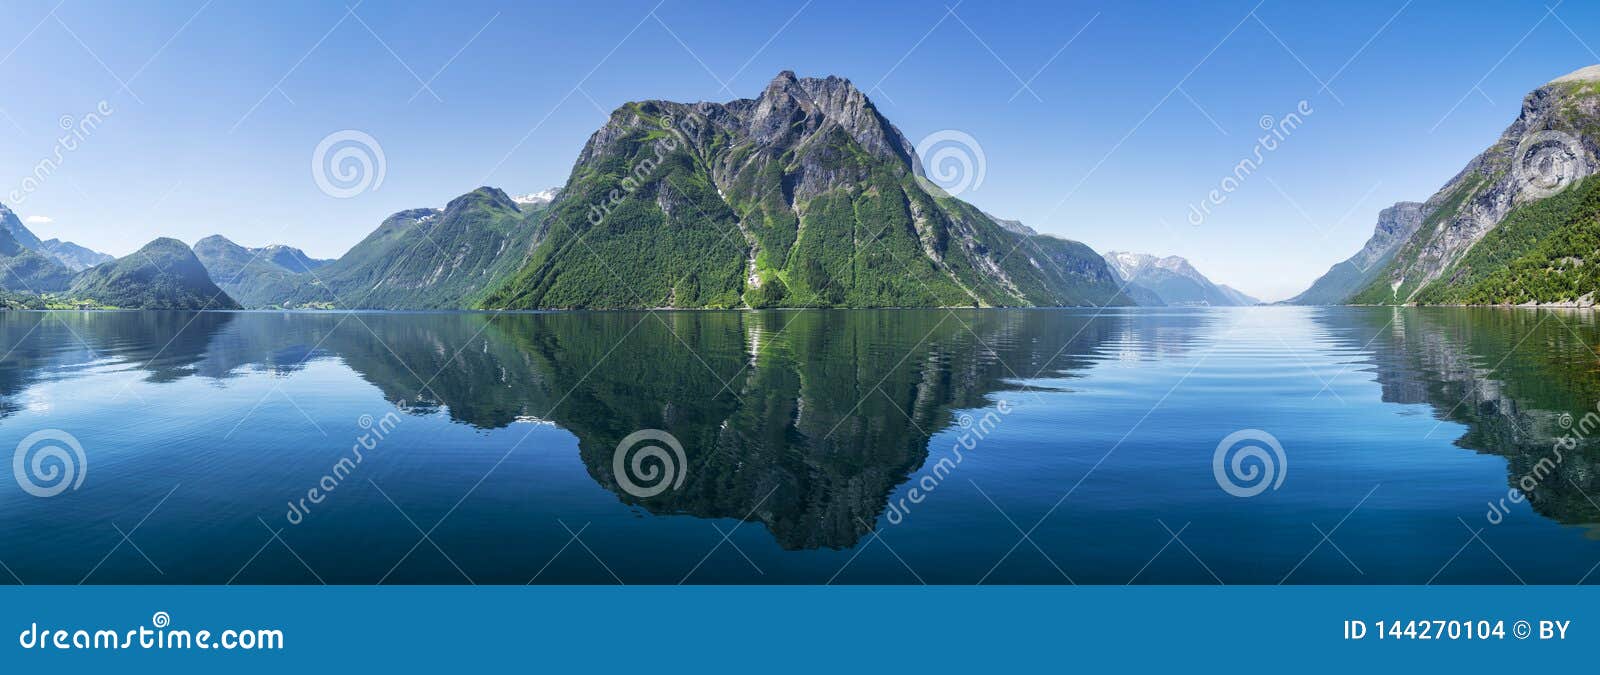 reflecting mountains at fjord in norway